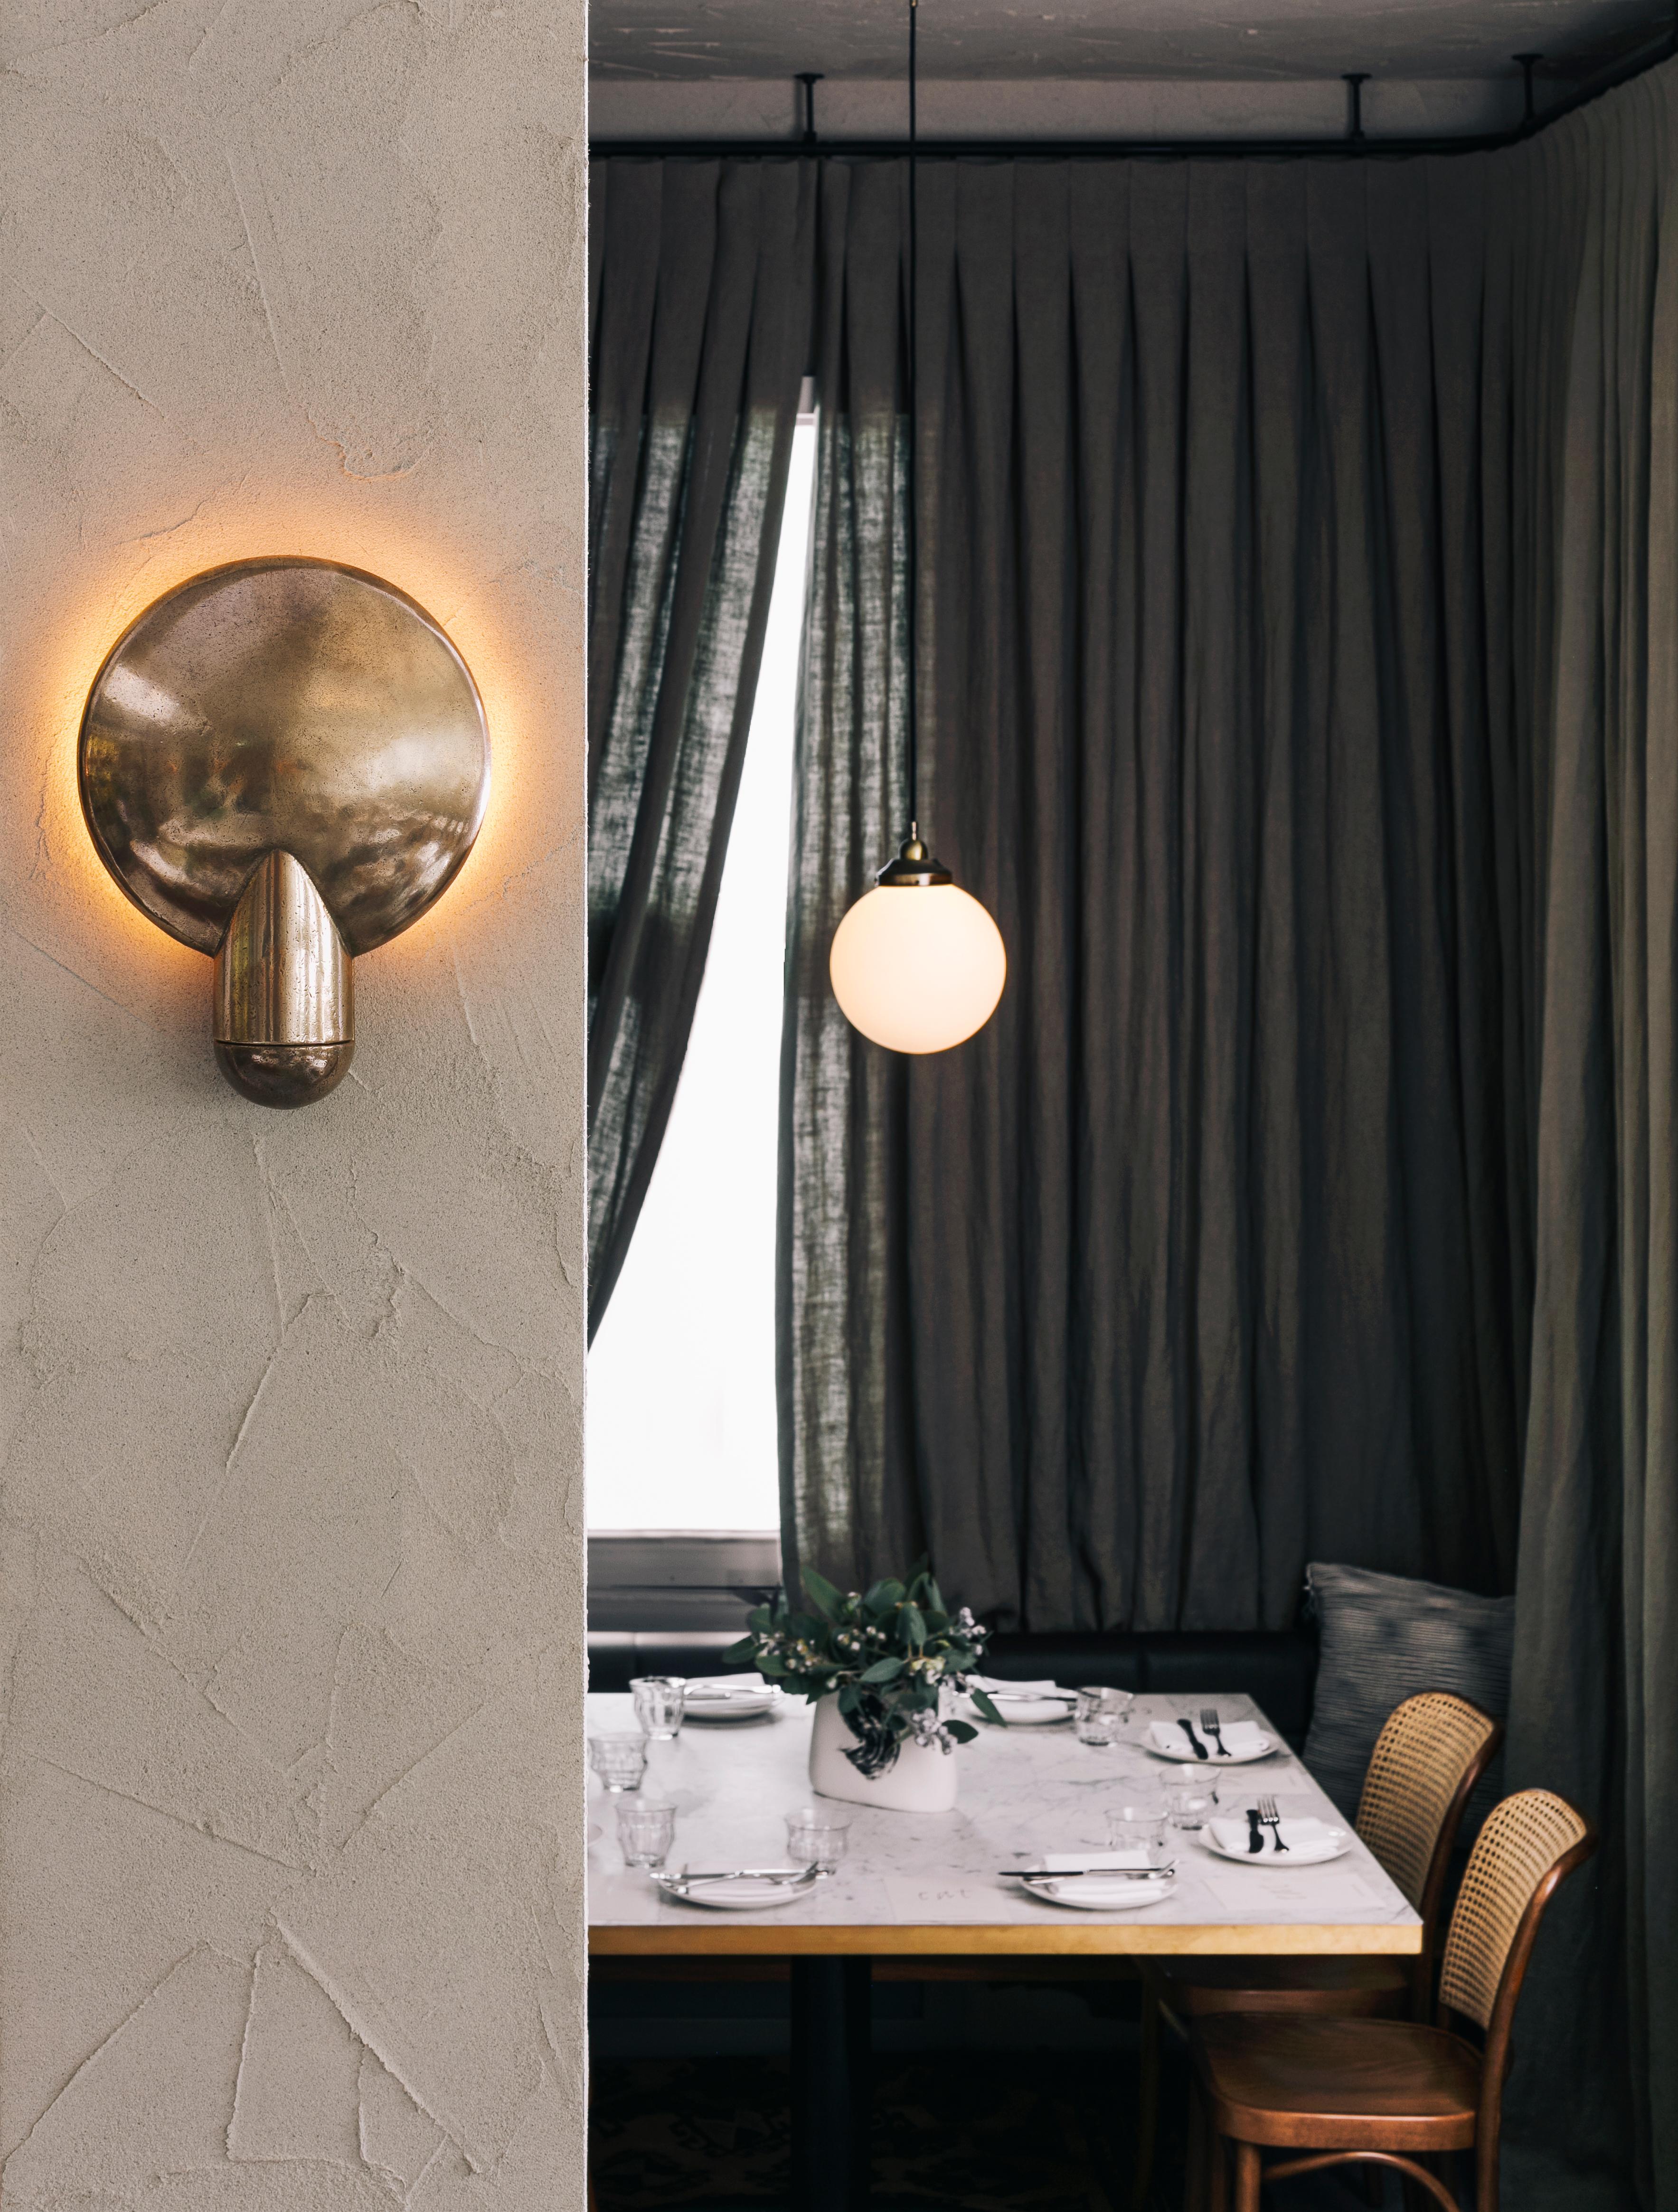 Bronze Surface Wall Sconce by Henry Wilson
Dimensions: W 30 x D 11 x H 40 cm
Materials: Bronze

This sculptural item is handmade in Sydney, Australia.
Sandwiched between the two bronze components, the light source is projected onto the concave